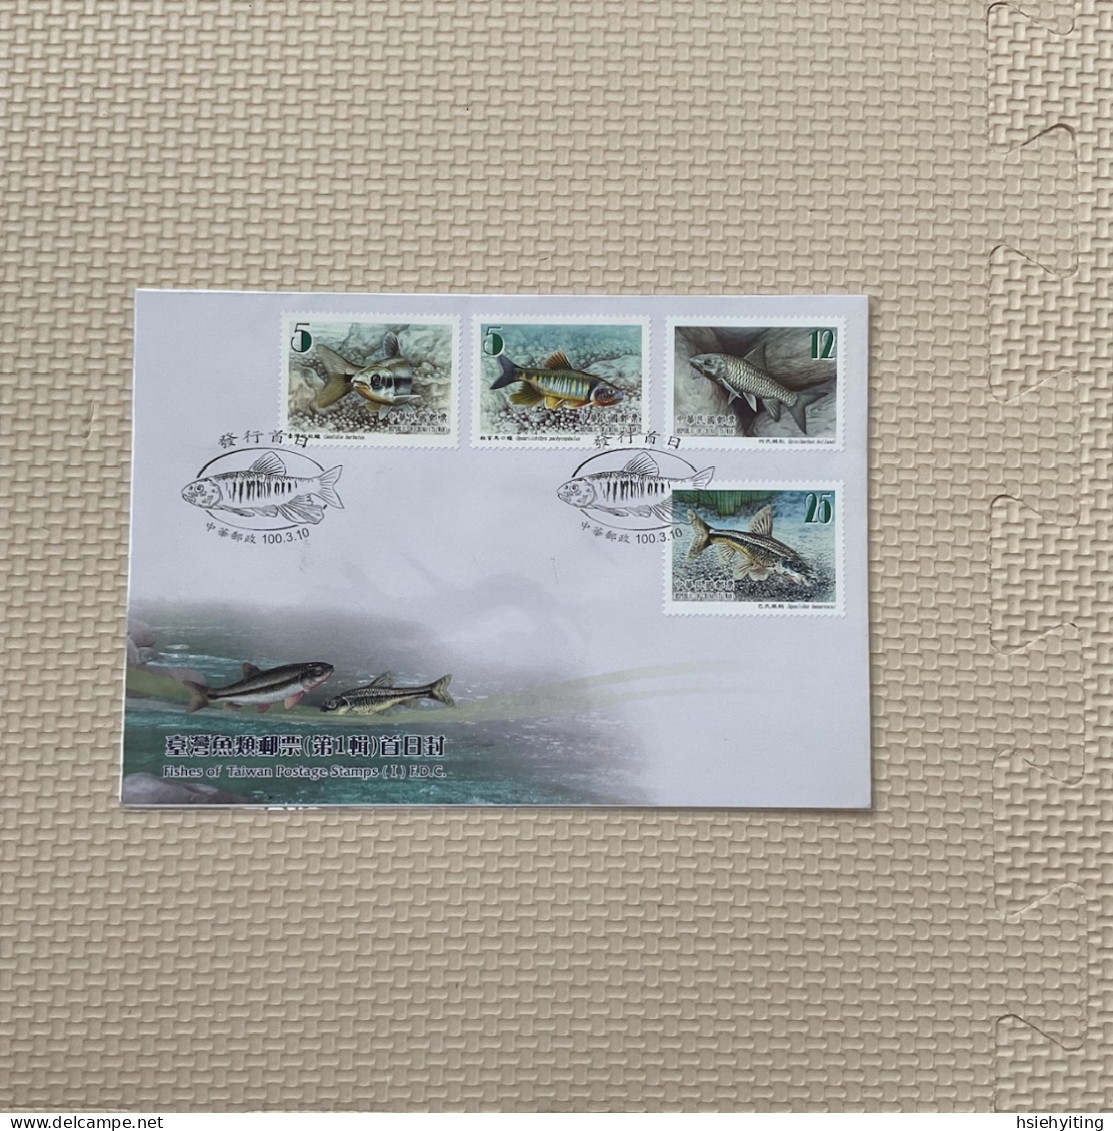 Taiwan Postage Stamps - Fische